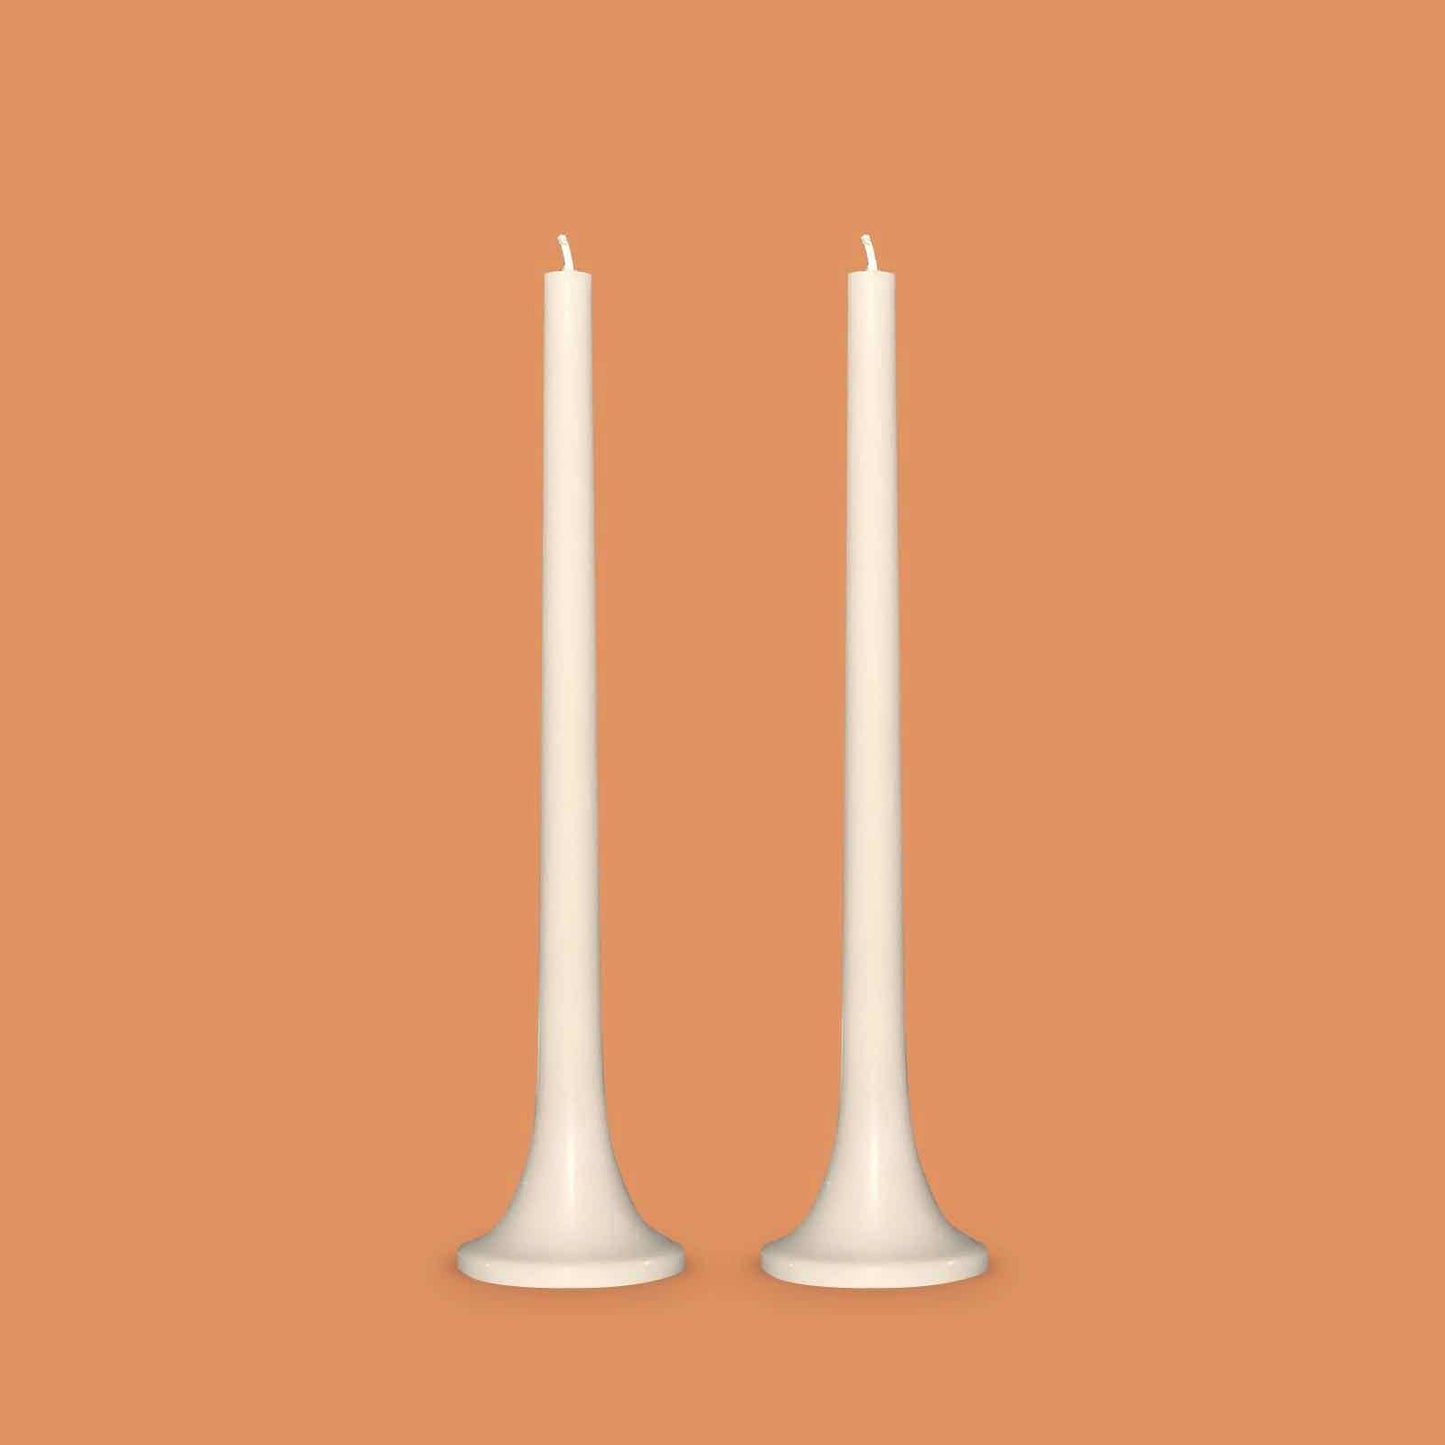 Neutral stone taper candles